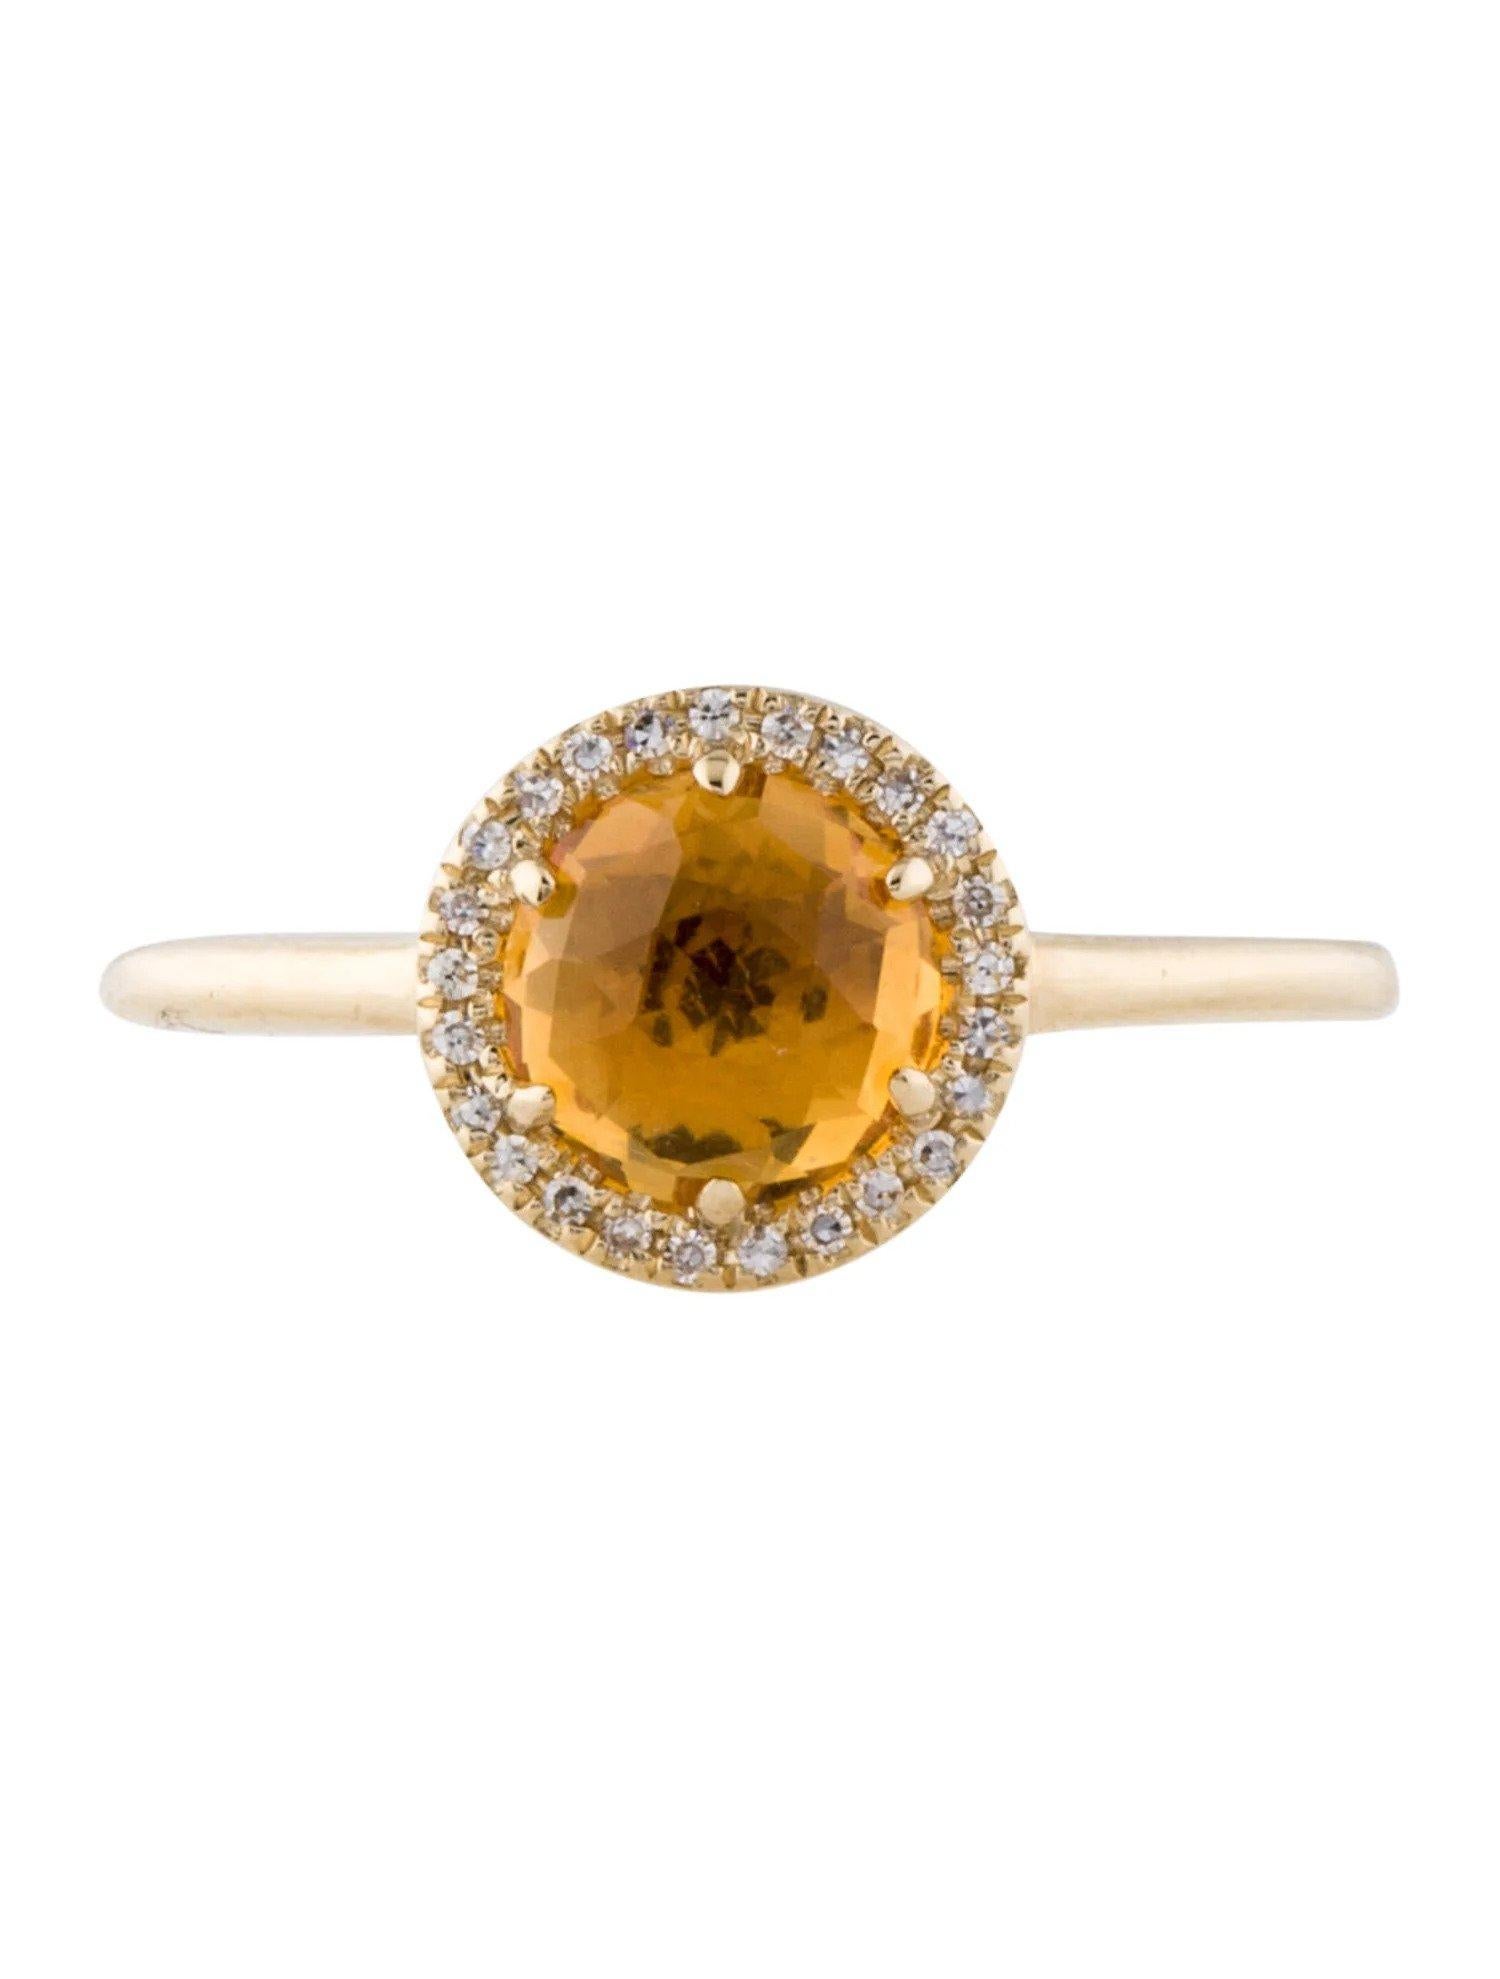 This Citrine & Diamond Ring is a stunning and timeless accessory that can add a touch of glamour and sophistication to any outfit. 

This ring features a 1.08 Carat Round Citrine , with a Diamond Halo comprised of 0.06 Carats of Single Cut Round